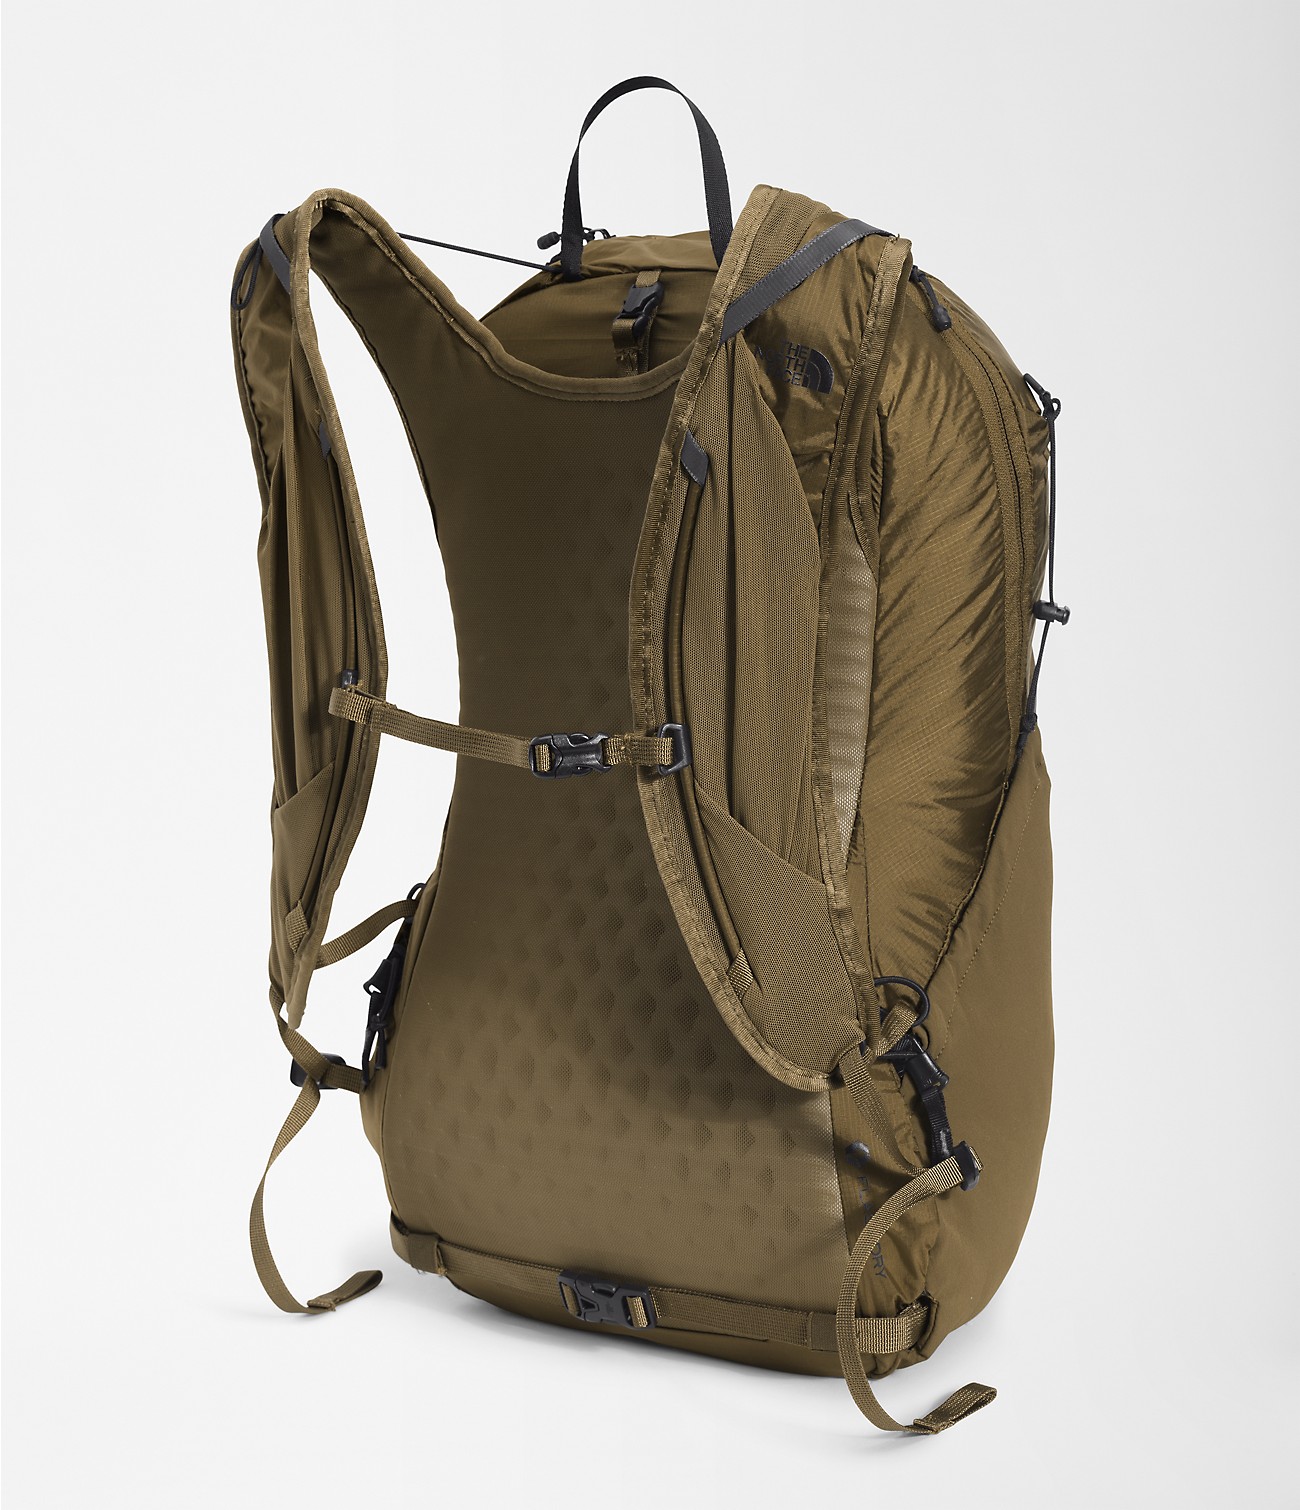 Chimera 18 Backpack | The North Face